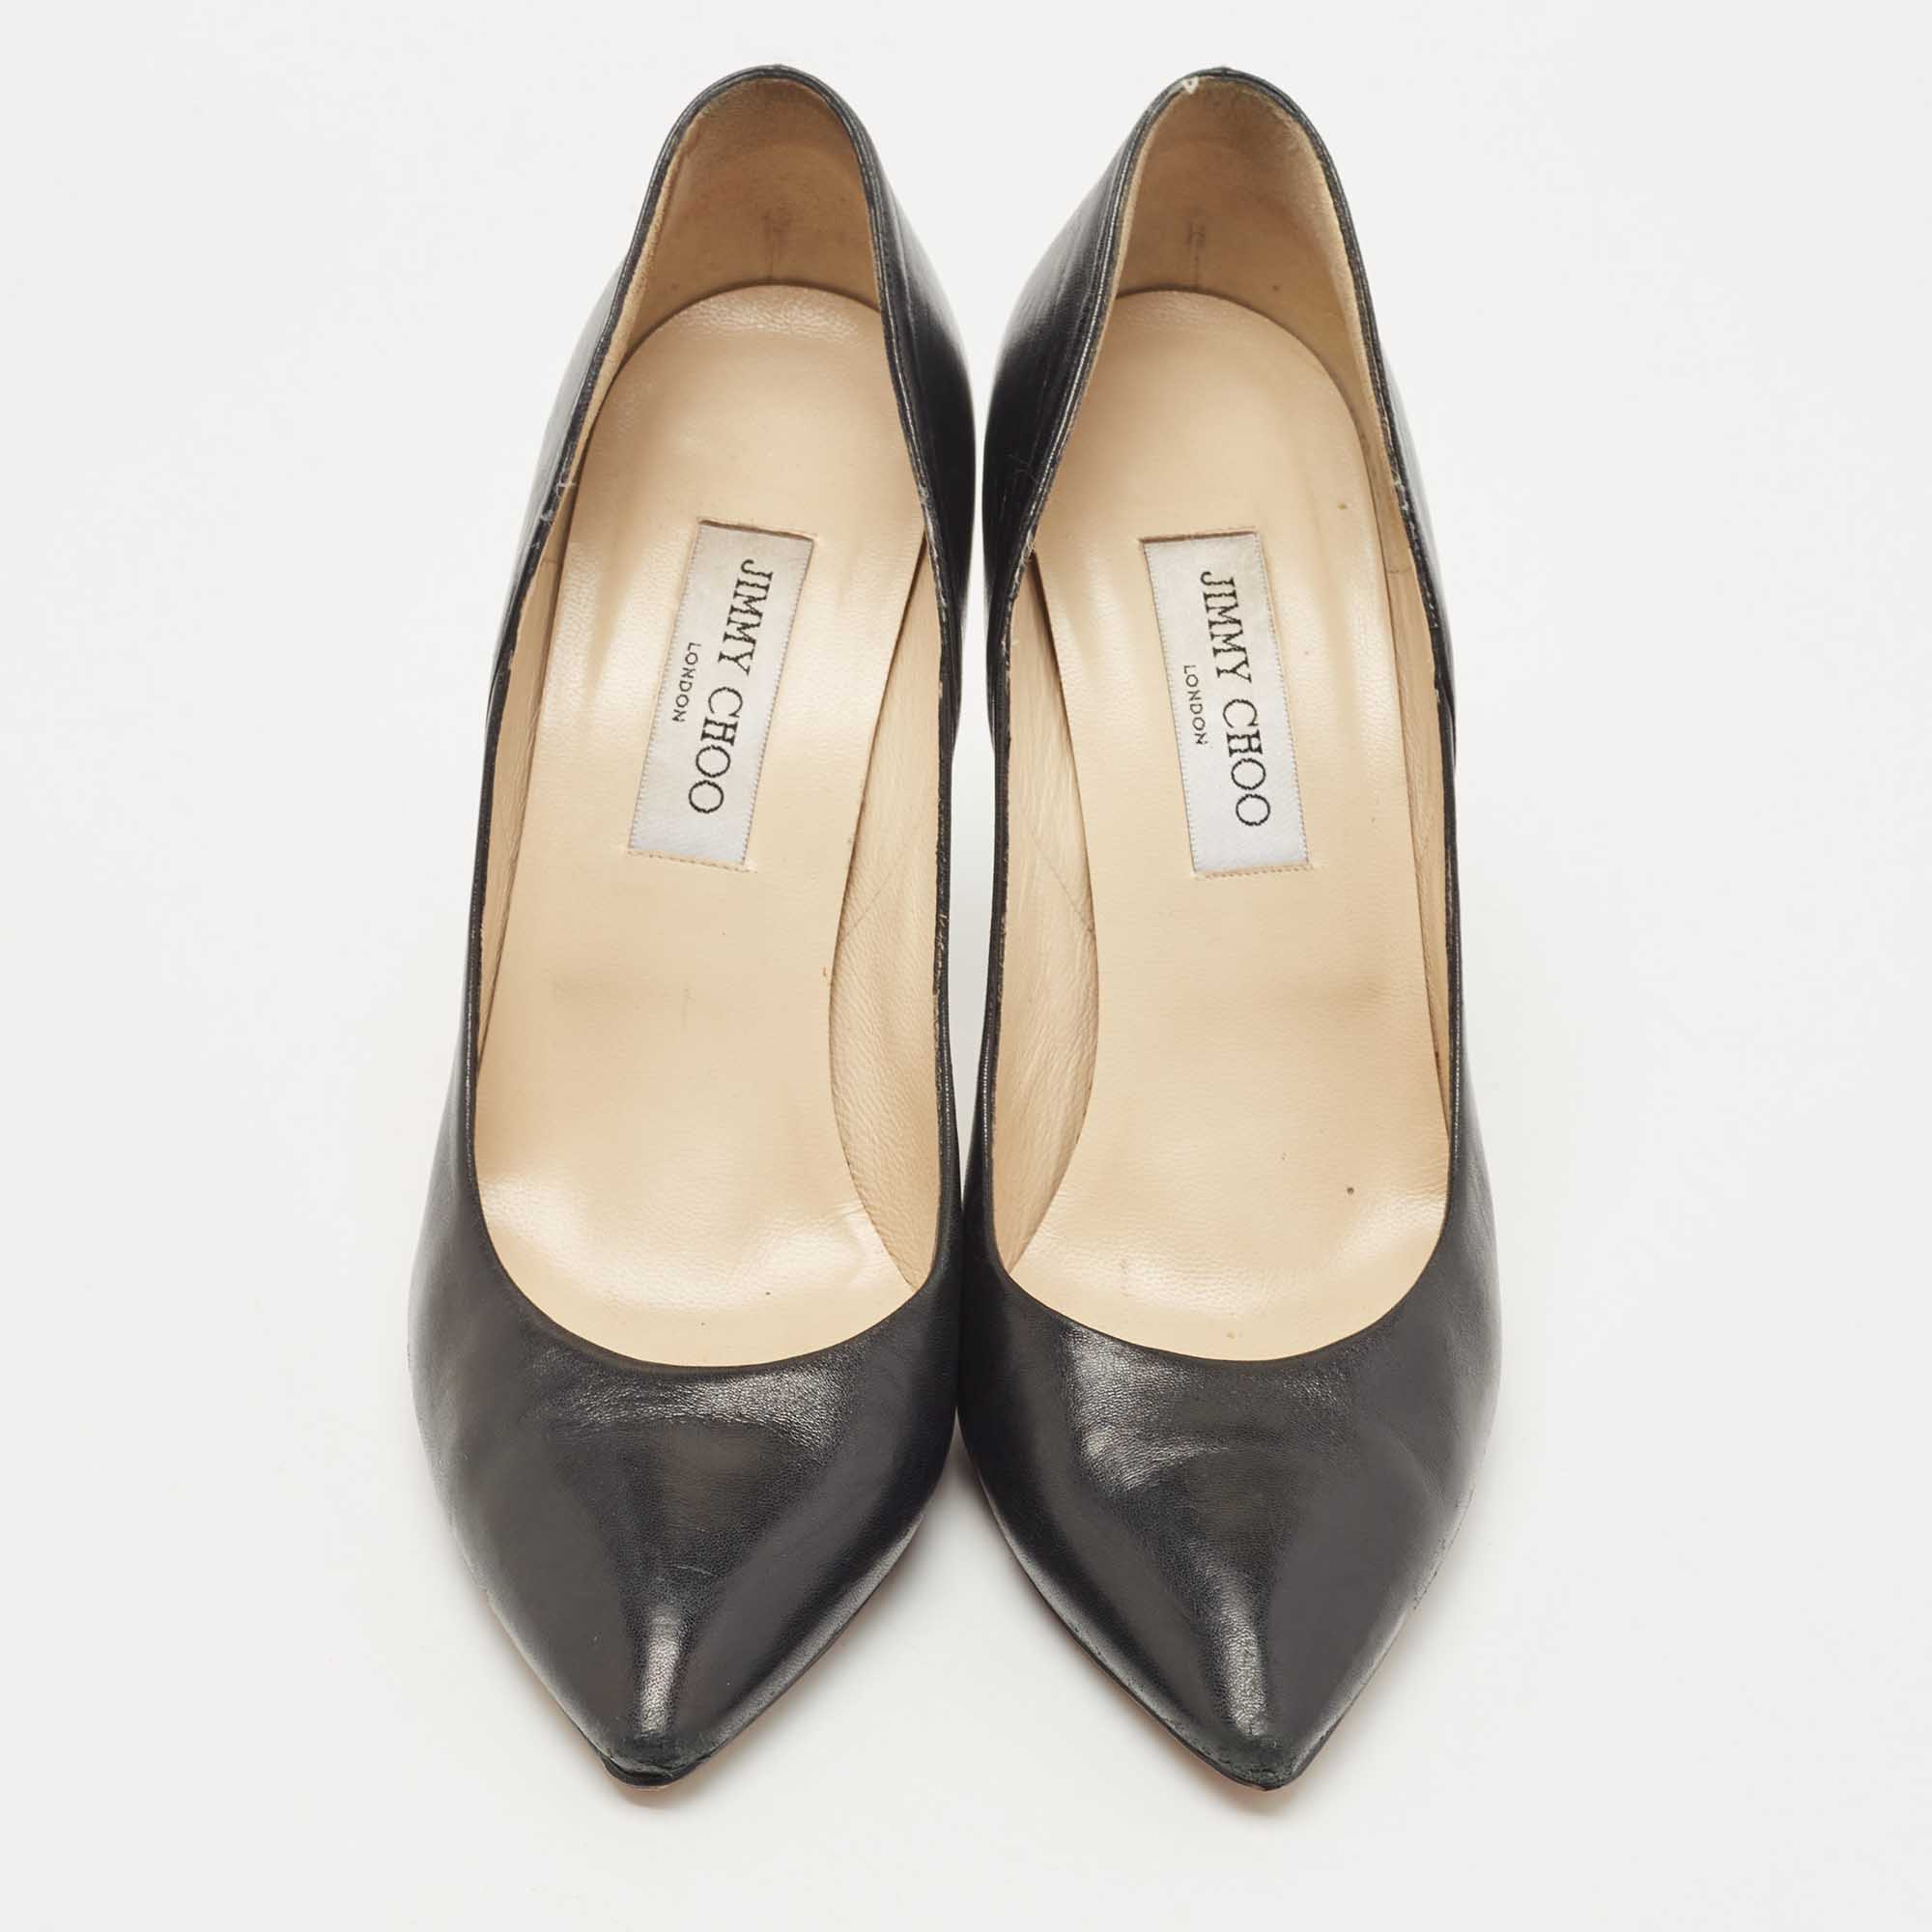 Jimmy Choo Black Leather Pointed Toe Pumps Size 40